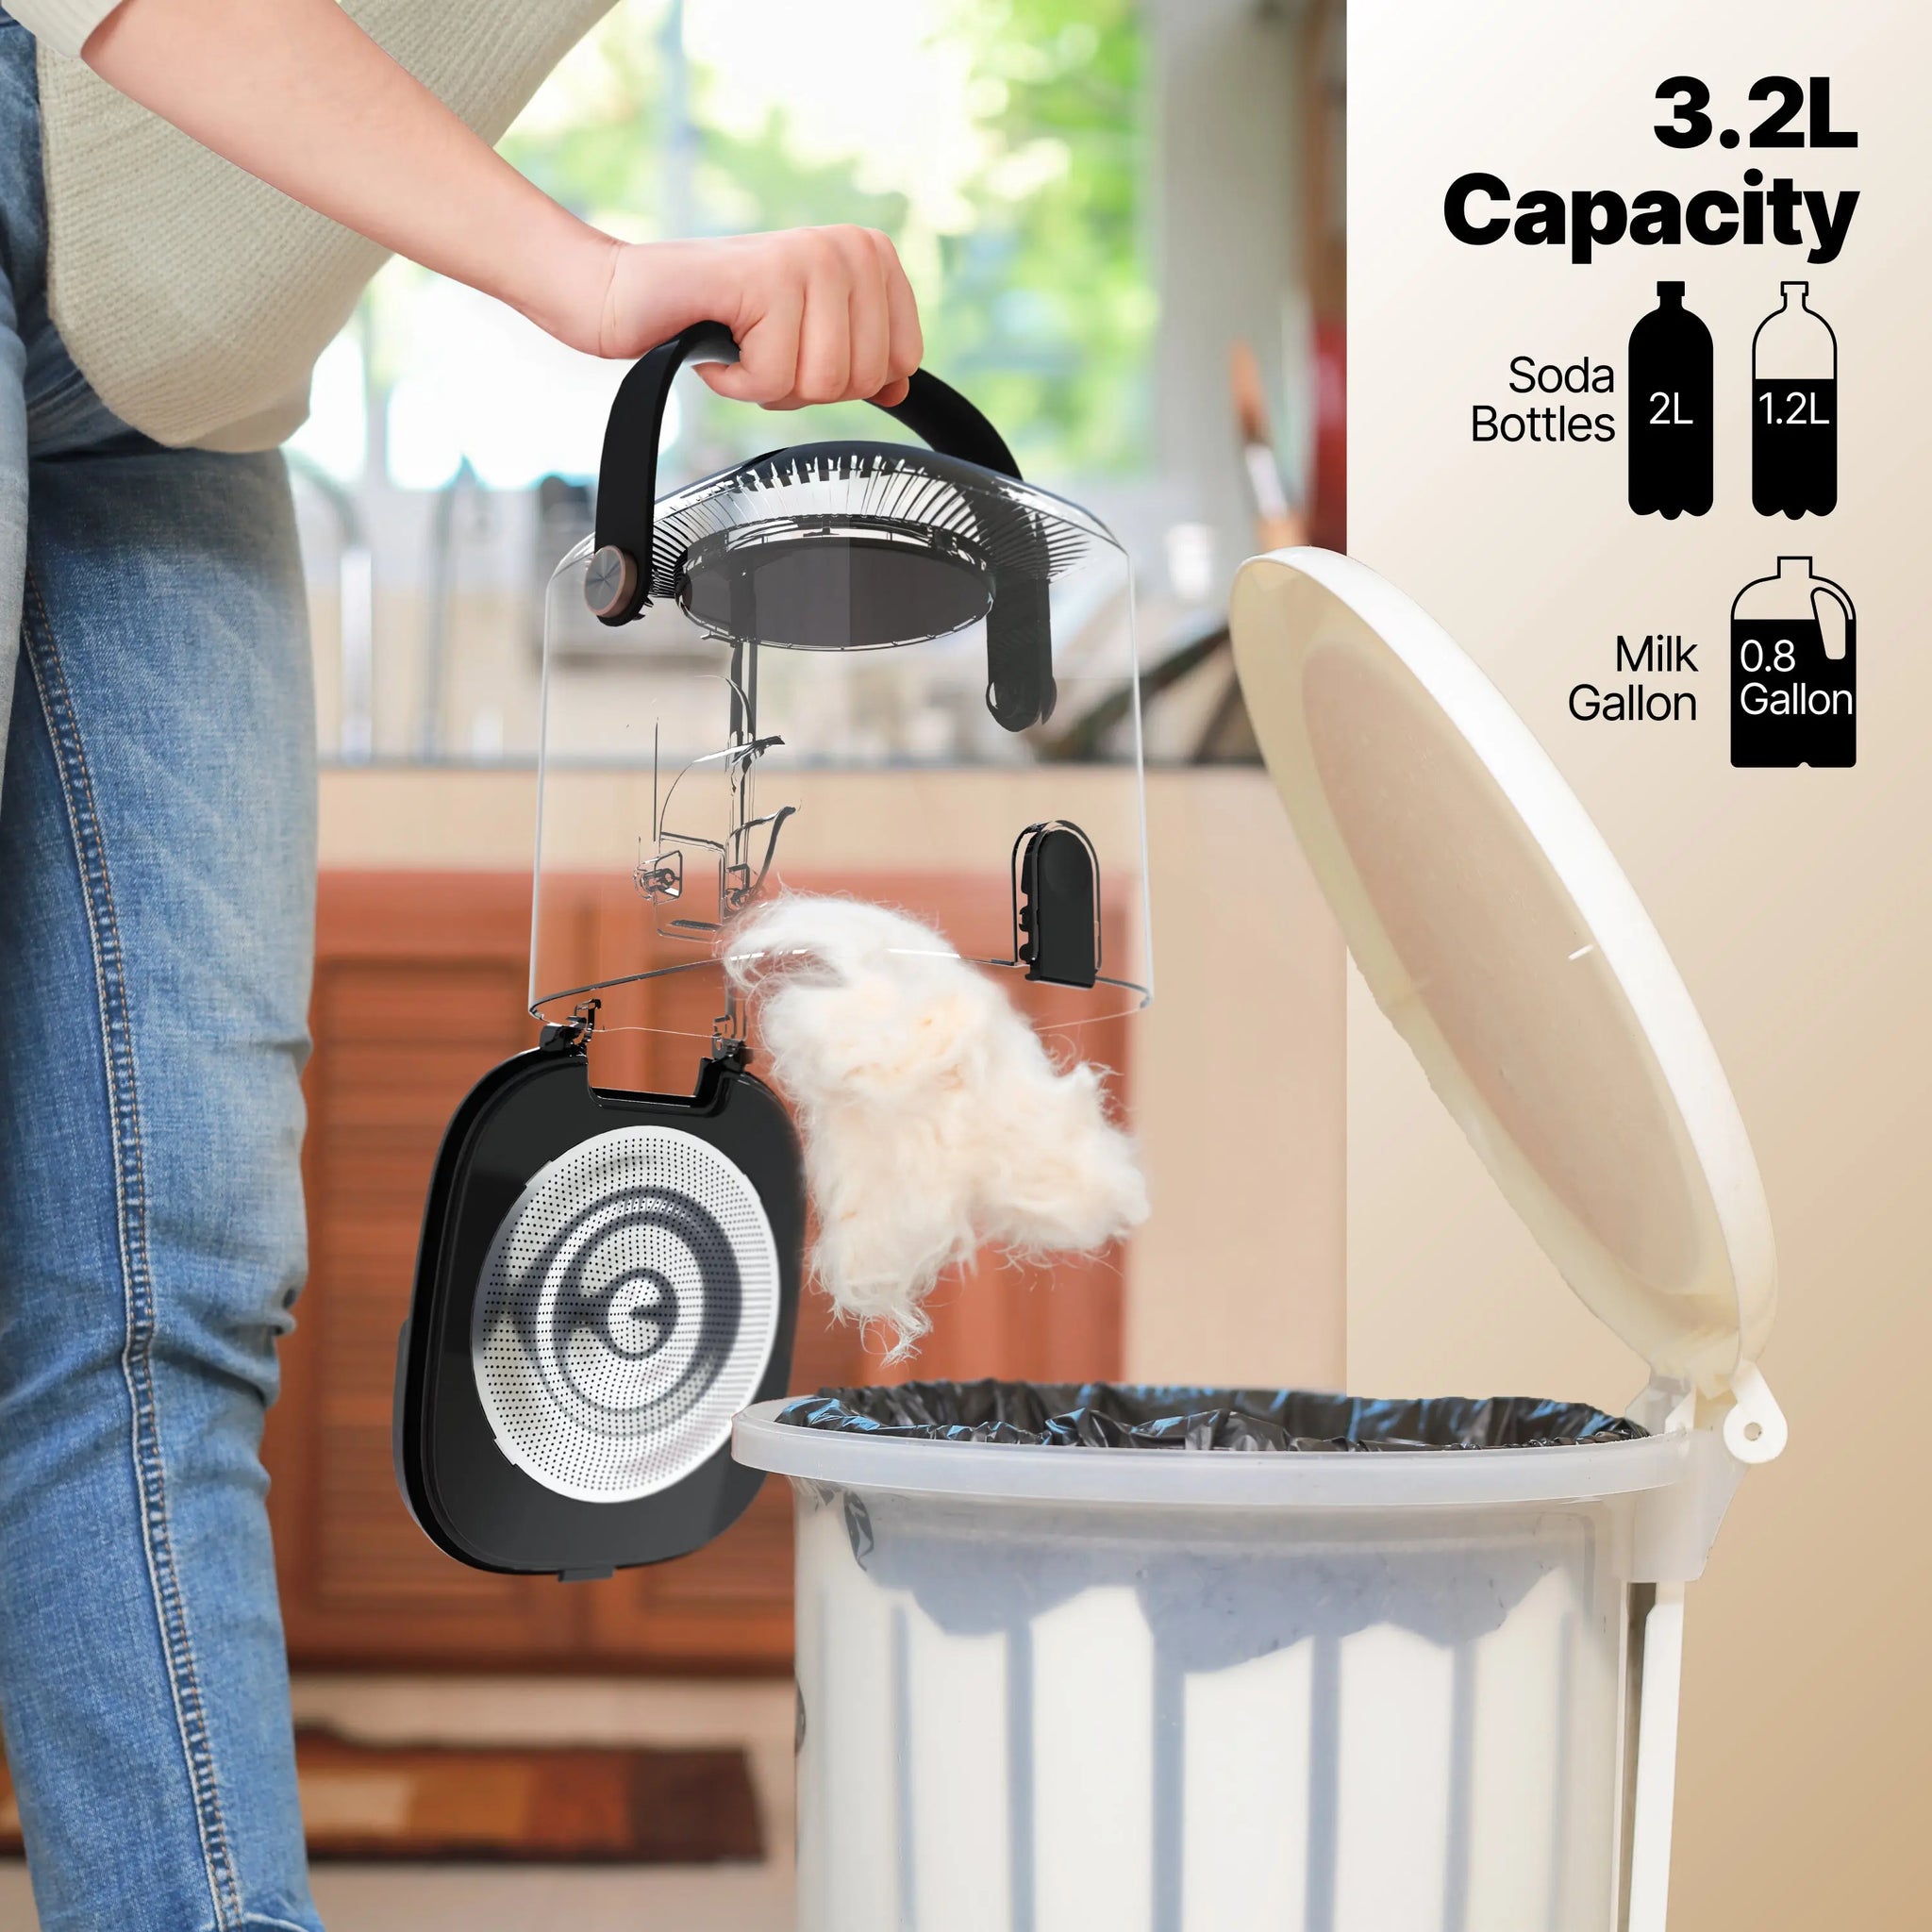 ONE Pet Vacuum with Grooming Kit, 3.2L Capacity, 6 Replaceable